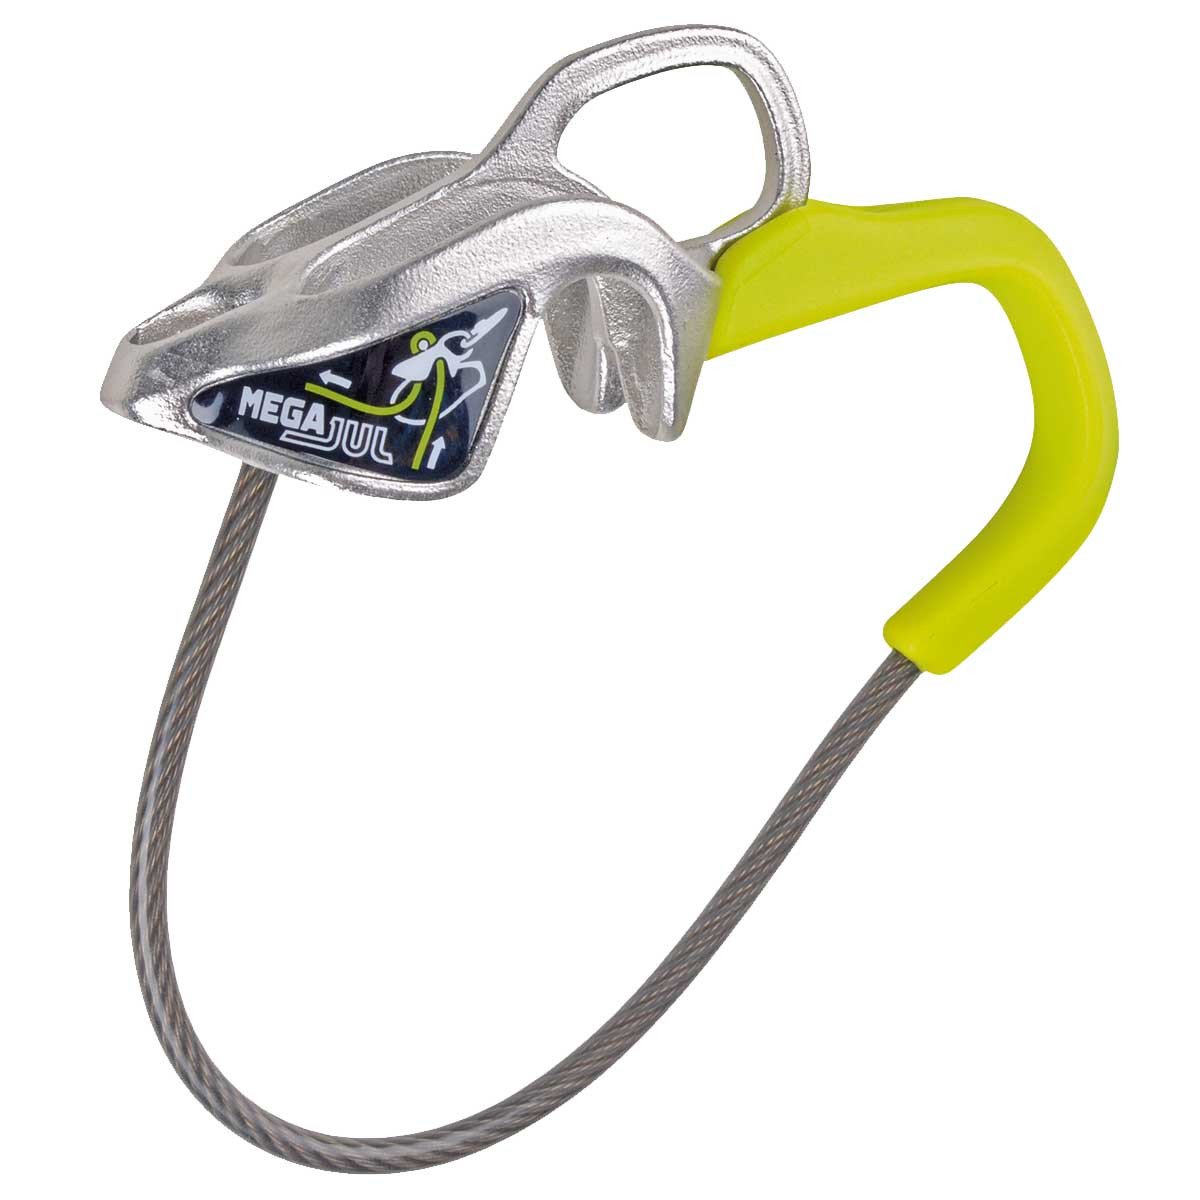 Edelrid Mega Jul belay device, in green and silver colours